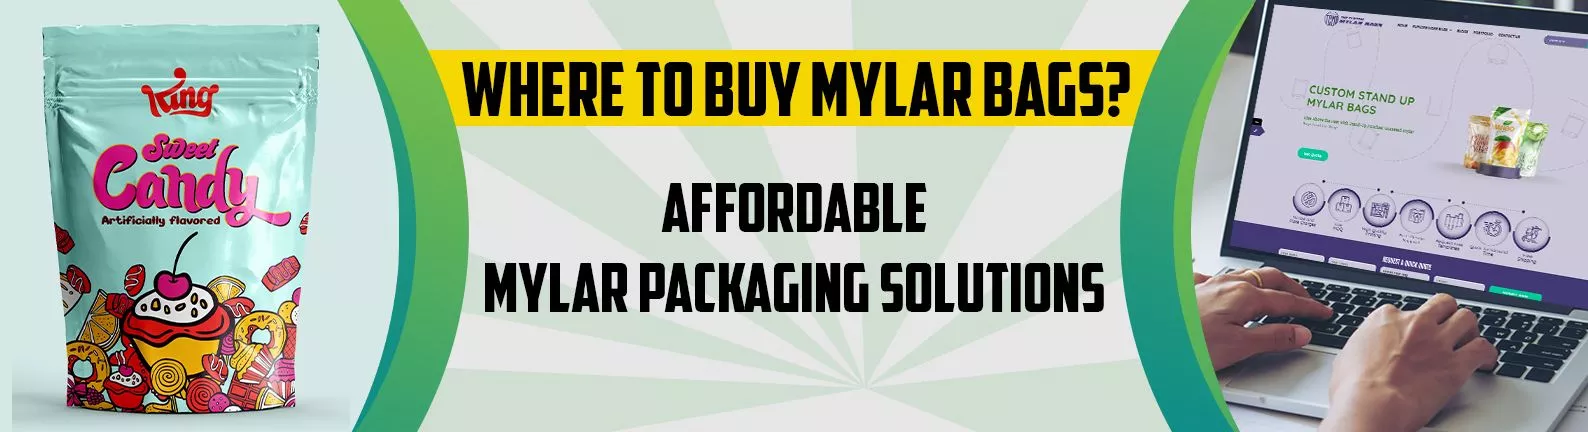 Where-to-Buy-Mylar-Bags-Affordable-Mylar-Packaging-Solutions